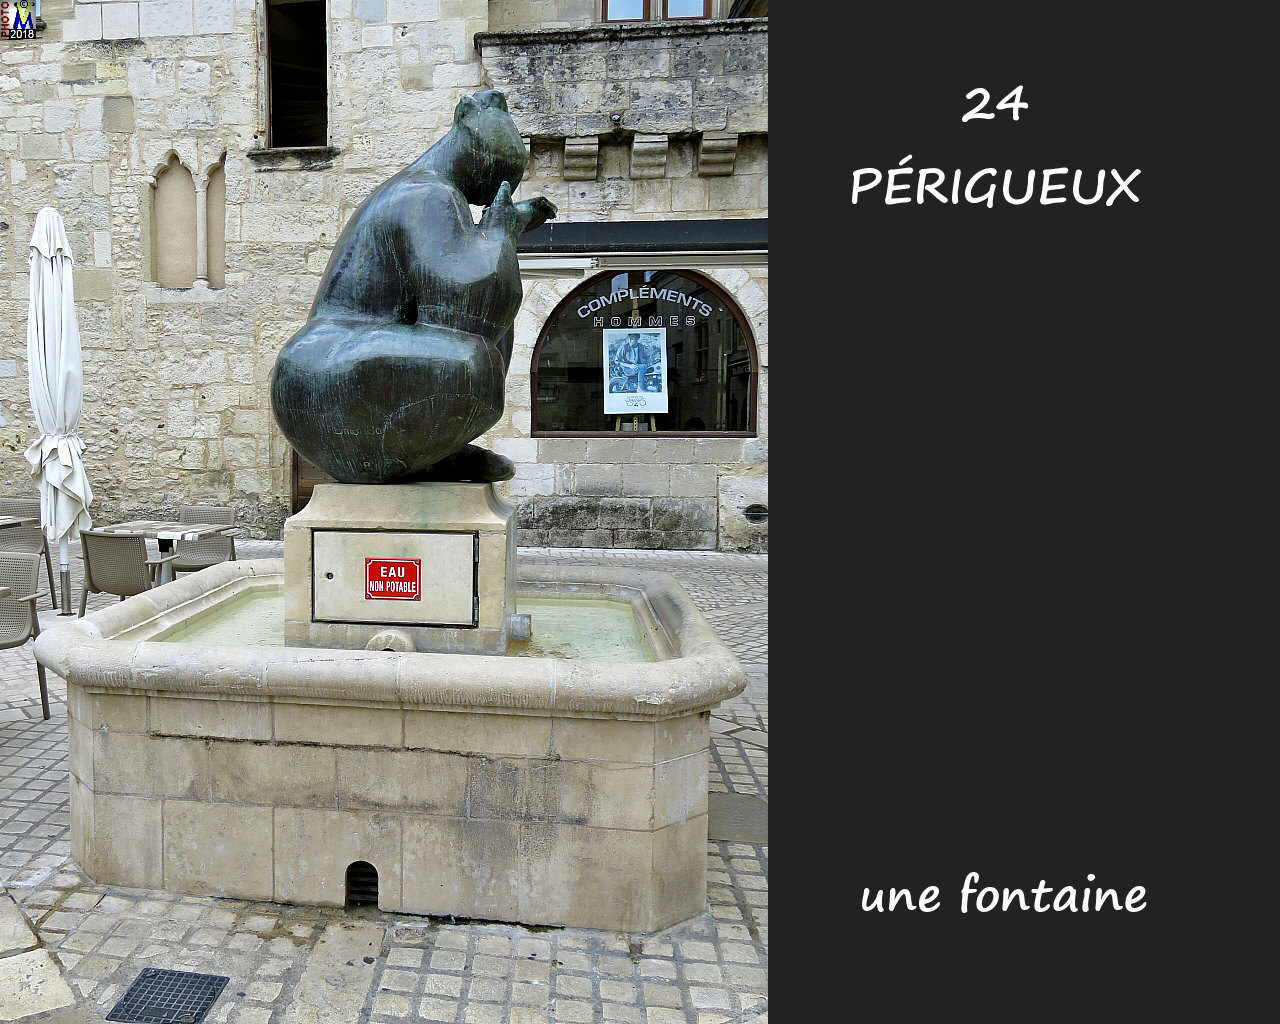 24PERIGUEUX_fontaine_1050.jpg